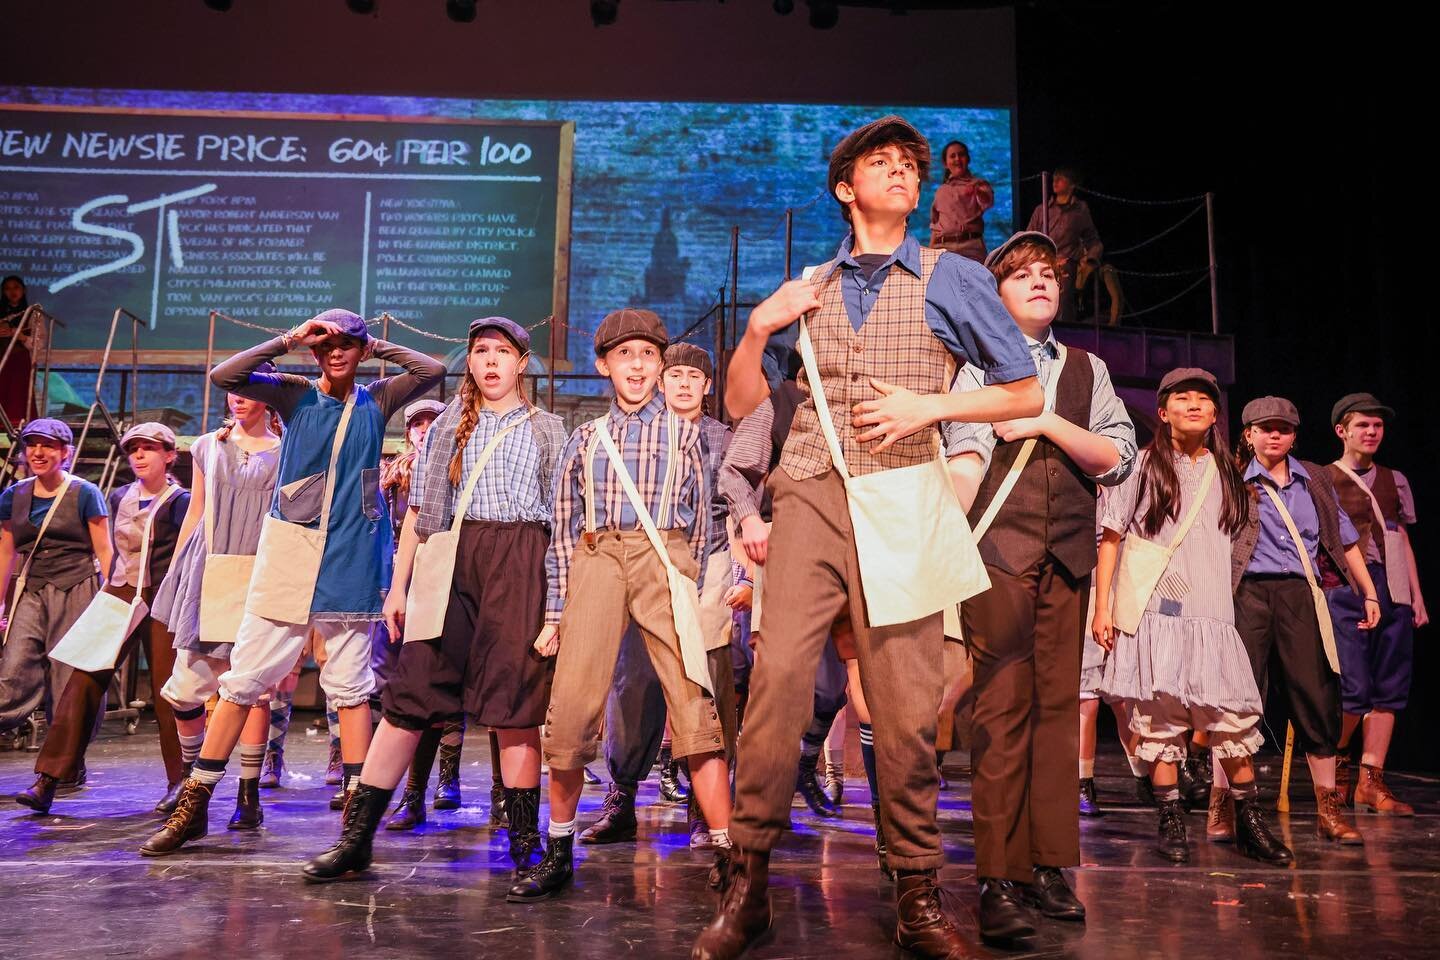 🗞️ The world will know that we've been here, and we'll shout it loud and clear. The world will know that we survived. - Jack Kelly ❤️ TONIGHT! TONIGHT! TONIGHT! It&rsquo;s our Bronx cast tonight at 7pm. 🎟️ bit.ly/bravonewsies 

#Broadway #Broadwayi